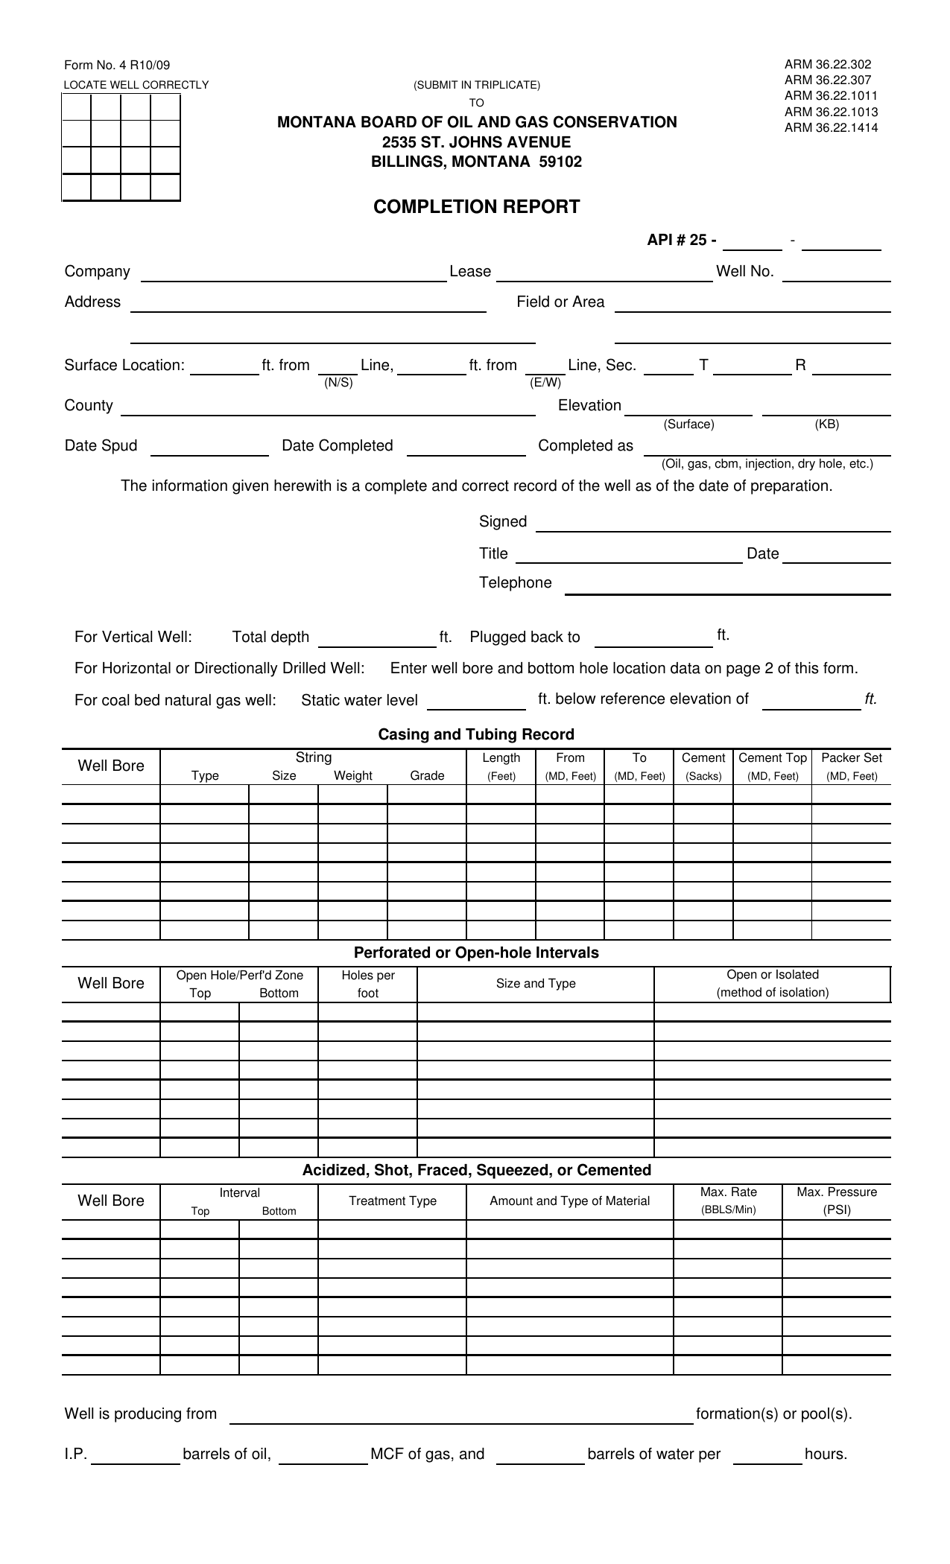 Form 4 Completion Report - Montana, Page 1